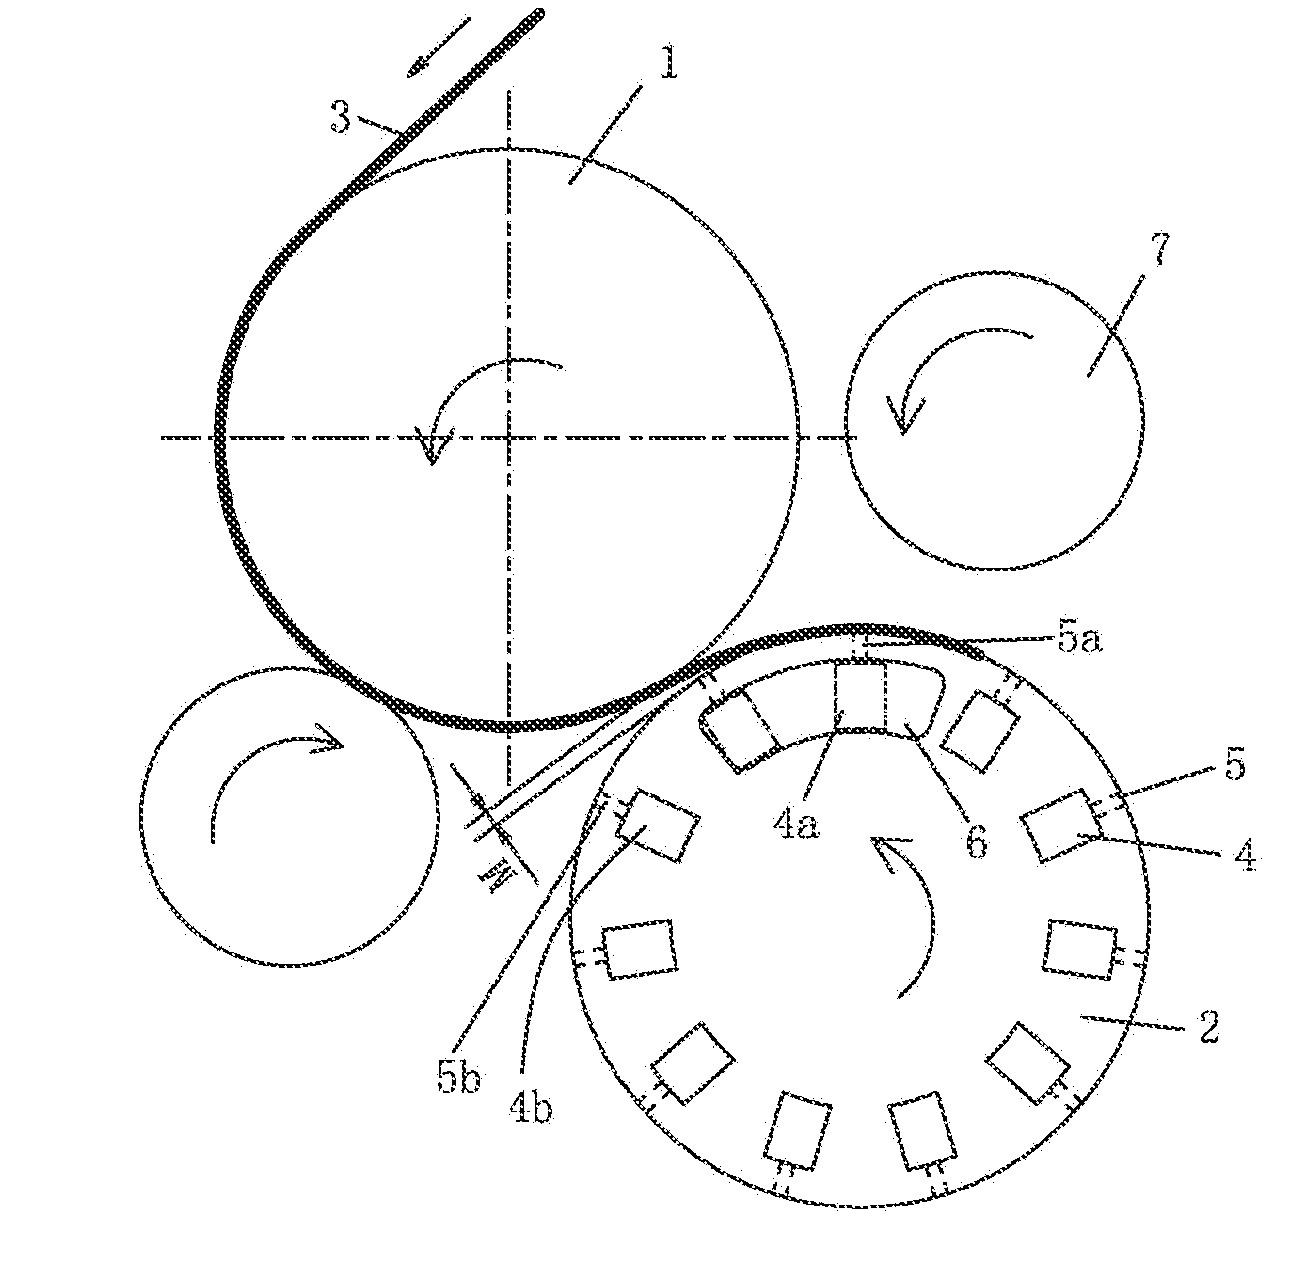 Coreless paper roll rewinding machine without a winding assisting plate